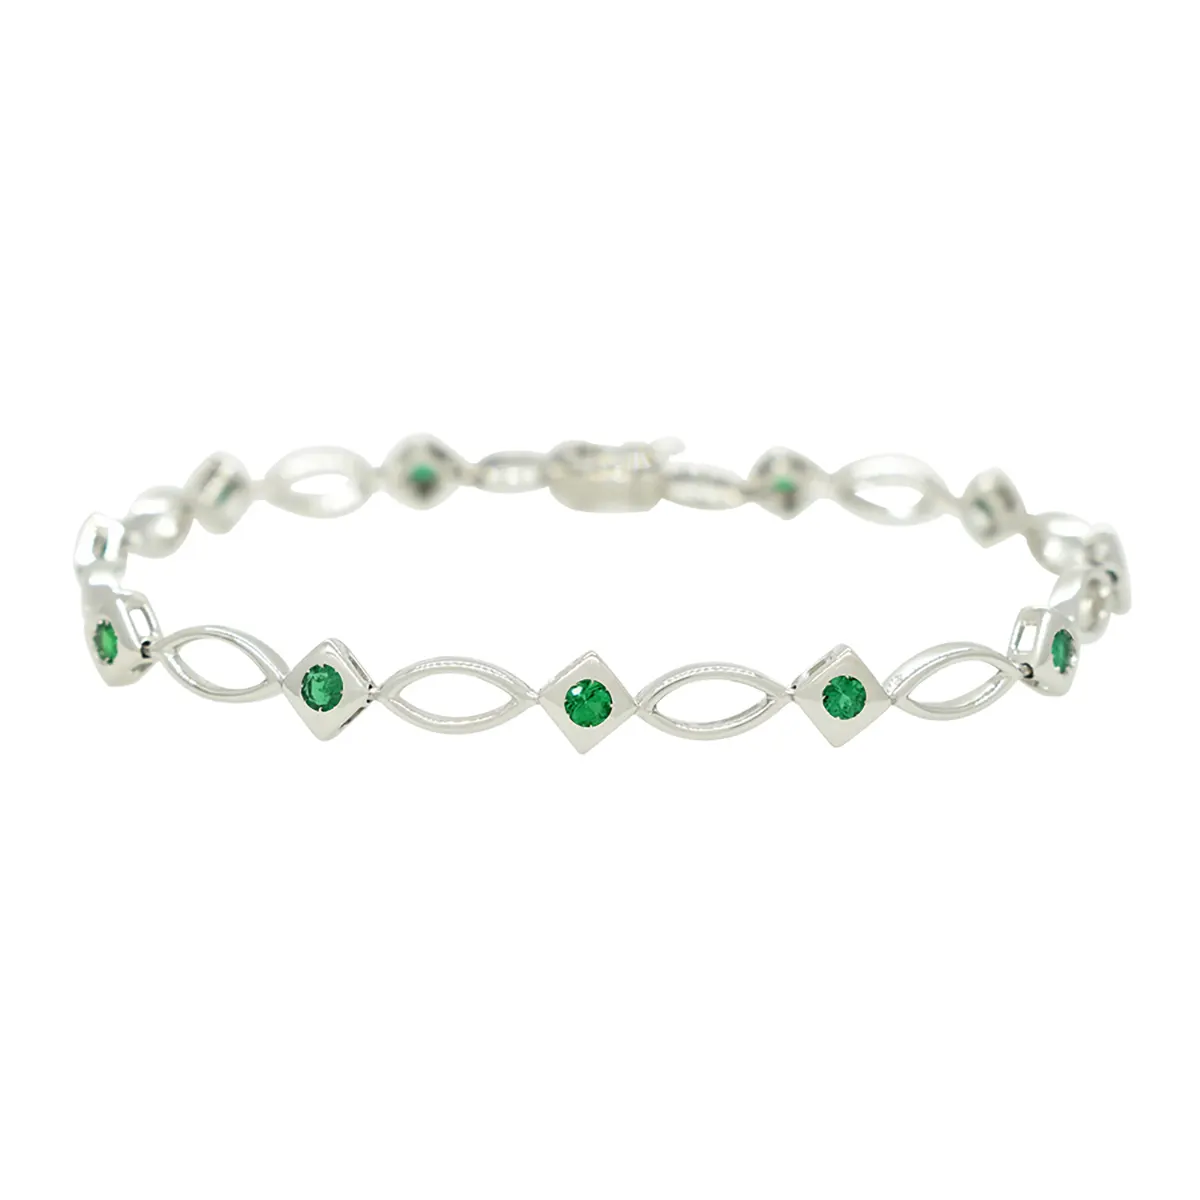 Emerald Bracelet in 18K White Gold With 11 Round Cut Natural Emeralds